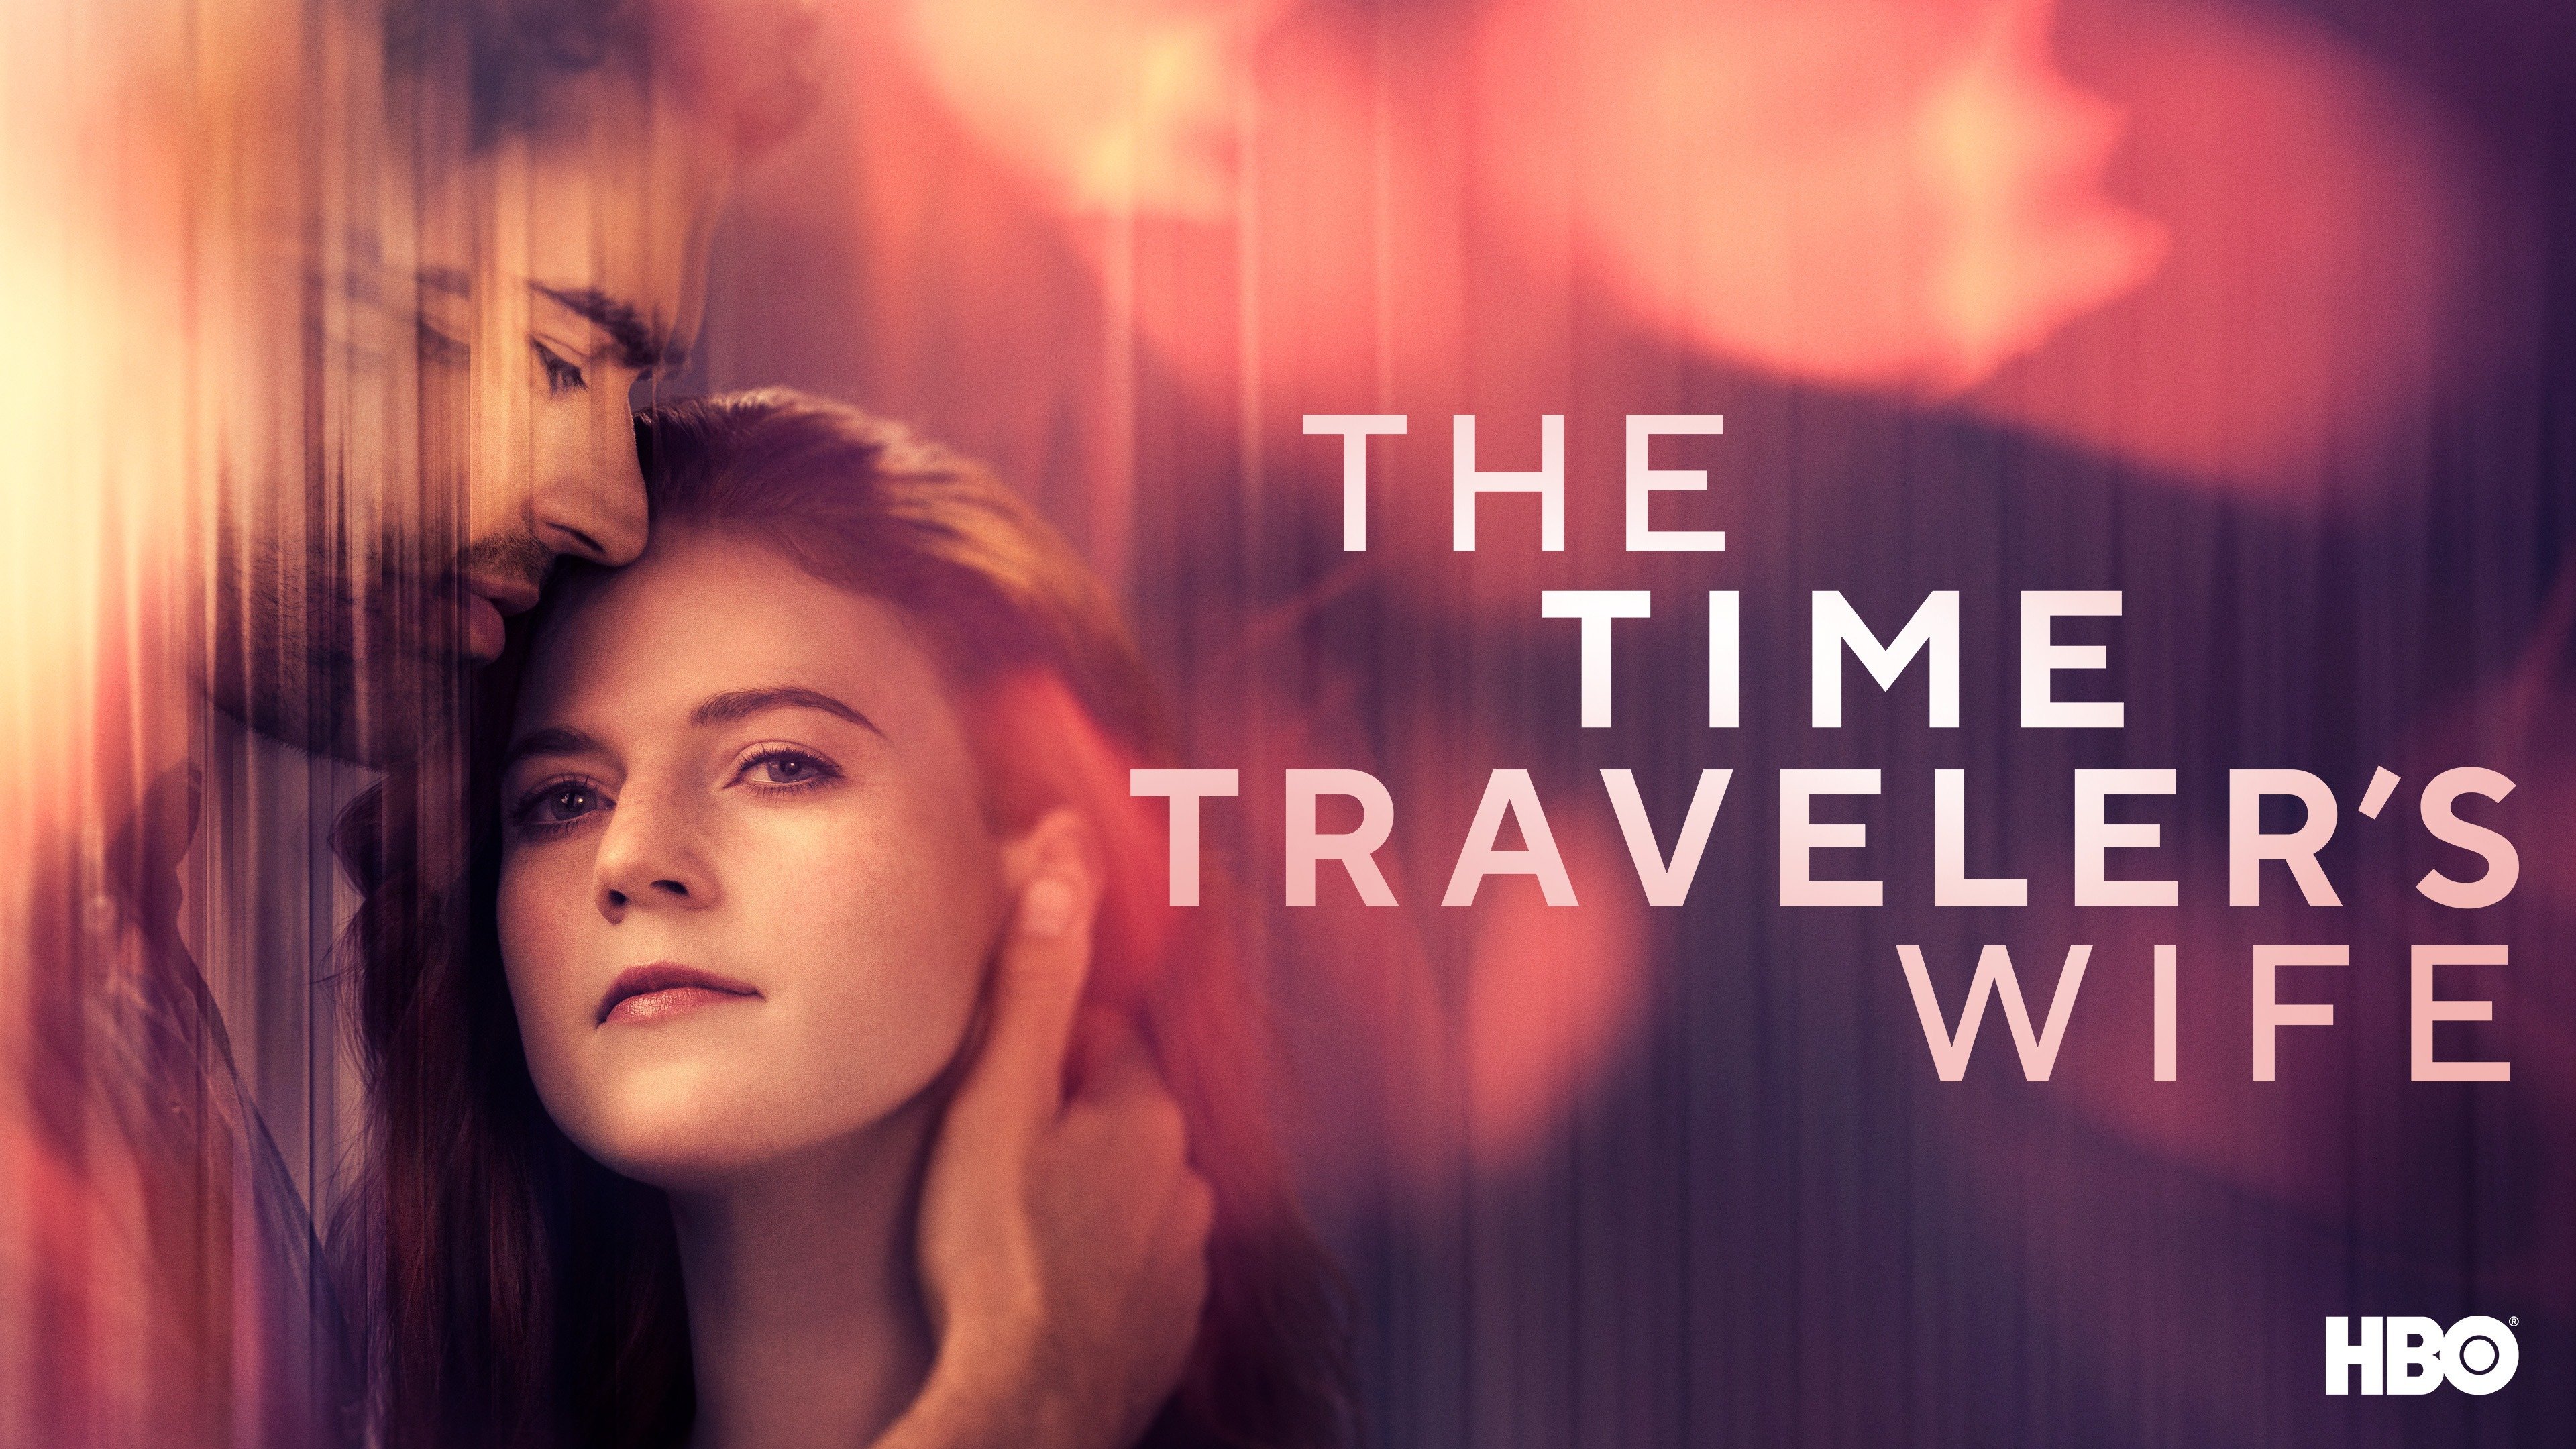 TV Show The Time Traveler's Wife HD Wallpaper | Background Image